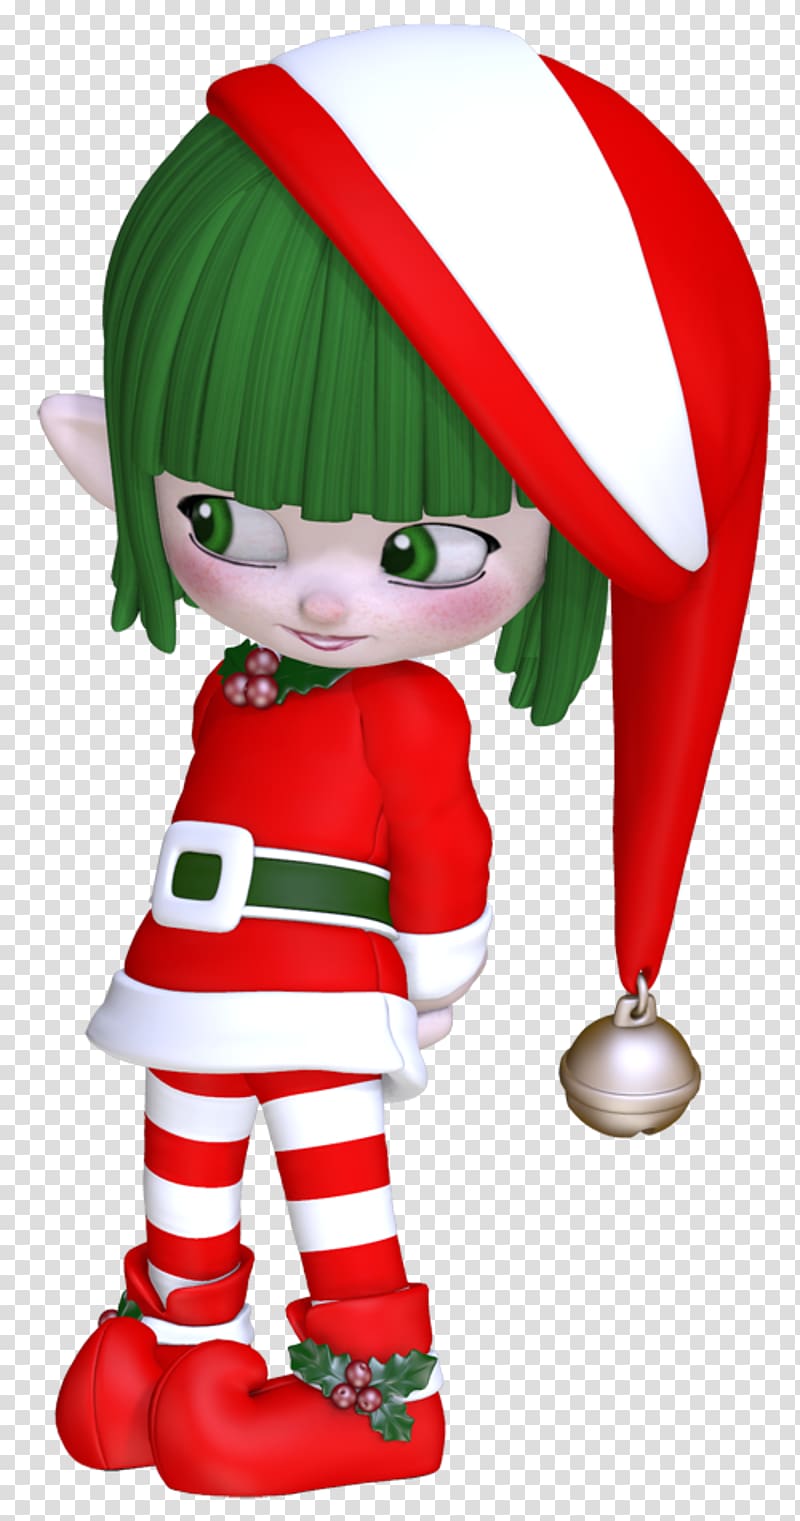 The Elf on the Shelf Christmas elf , Elf transparent background PNG clipart